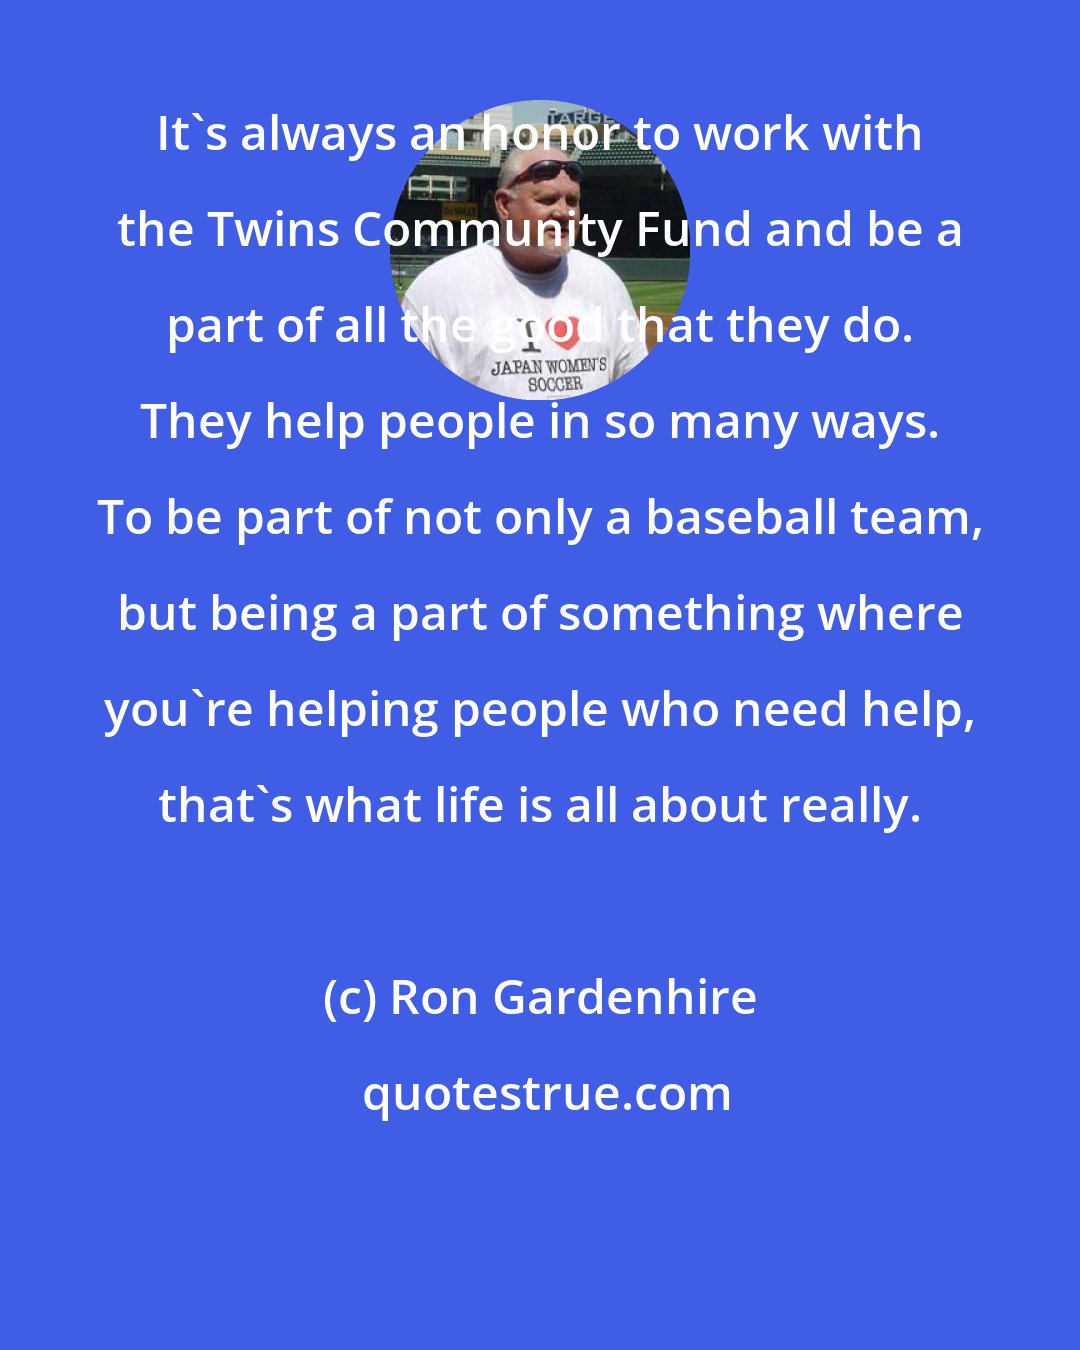 Ron Gardenhire: It's always an honor to work with the Twins Community Fund and be a part of all the good that they do. They help people in so many ways. To be part of not only a baseball team, but being a part of something where you're helping people who need help, that's what life is all about really.